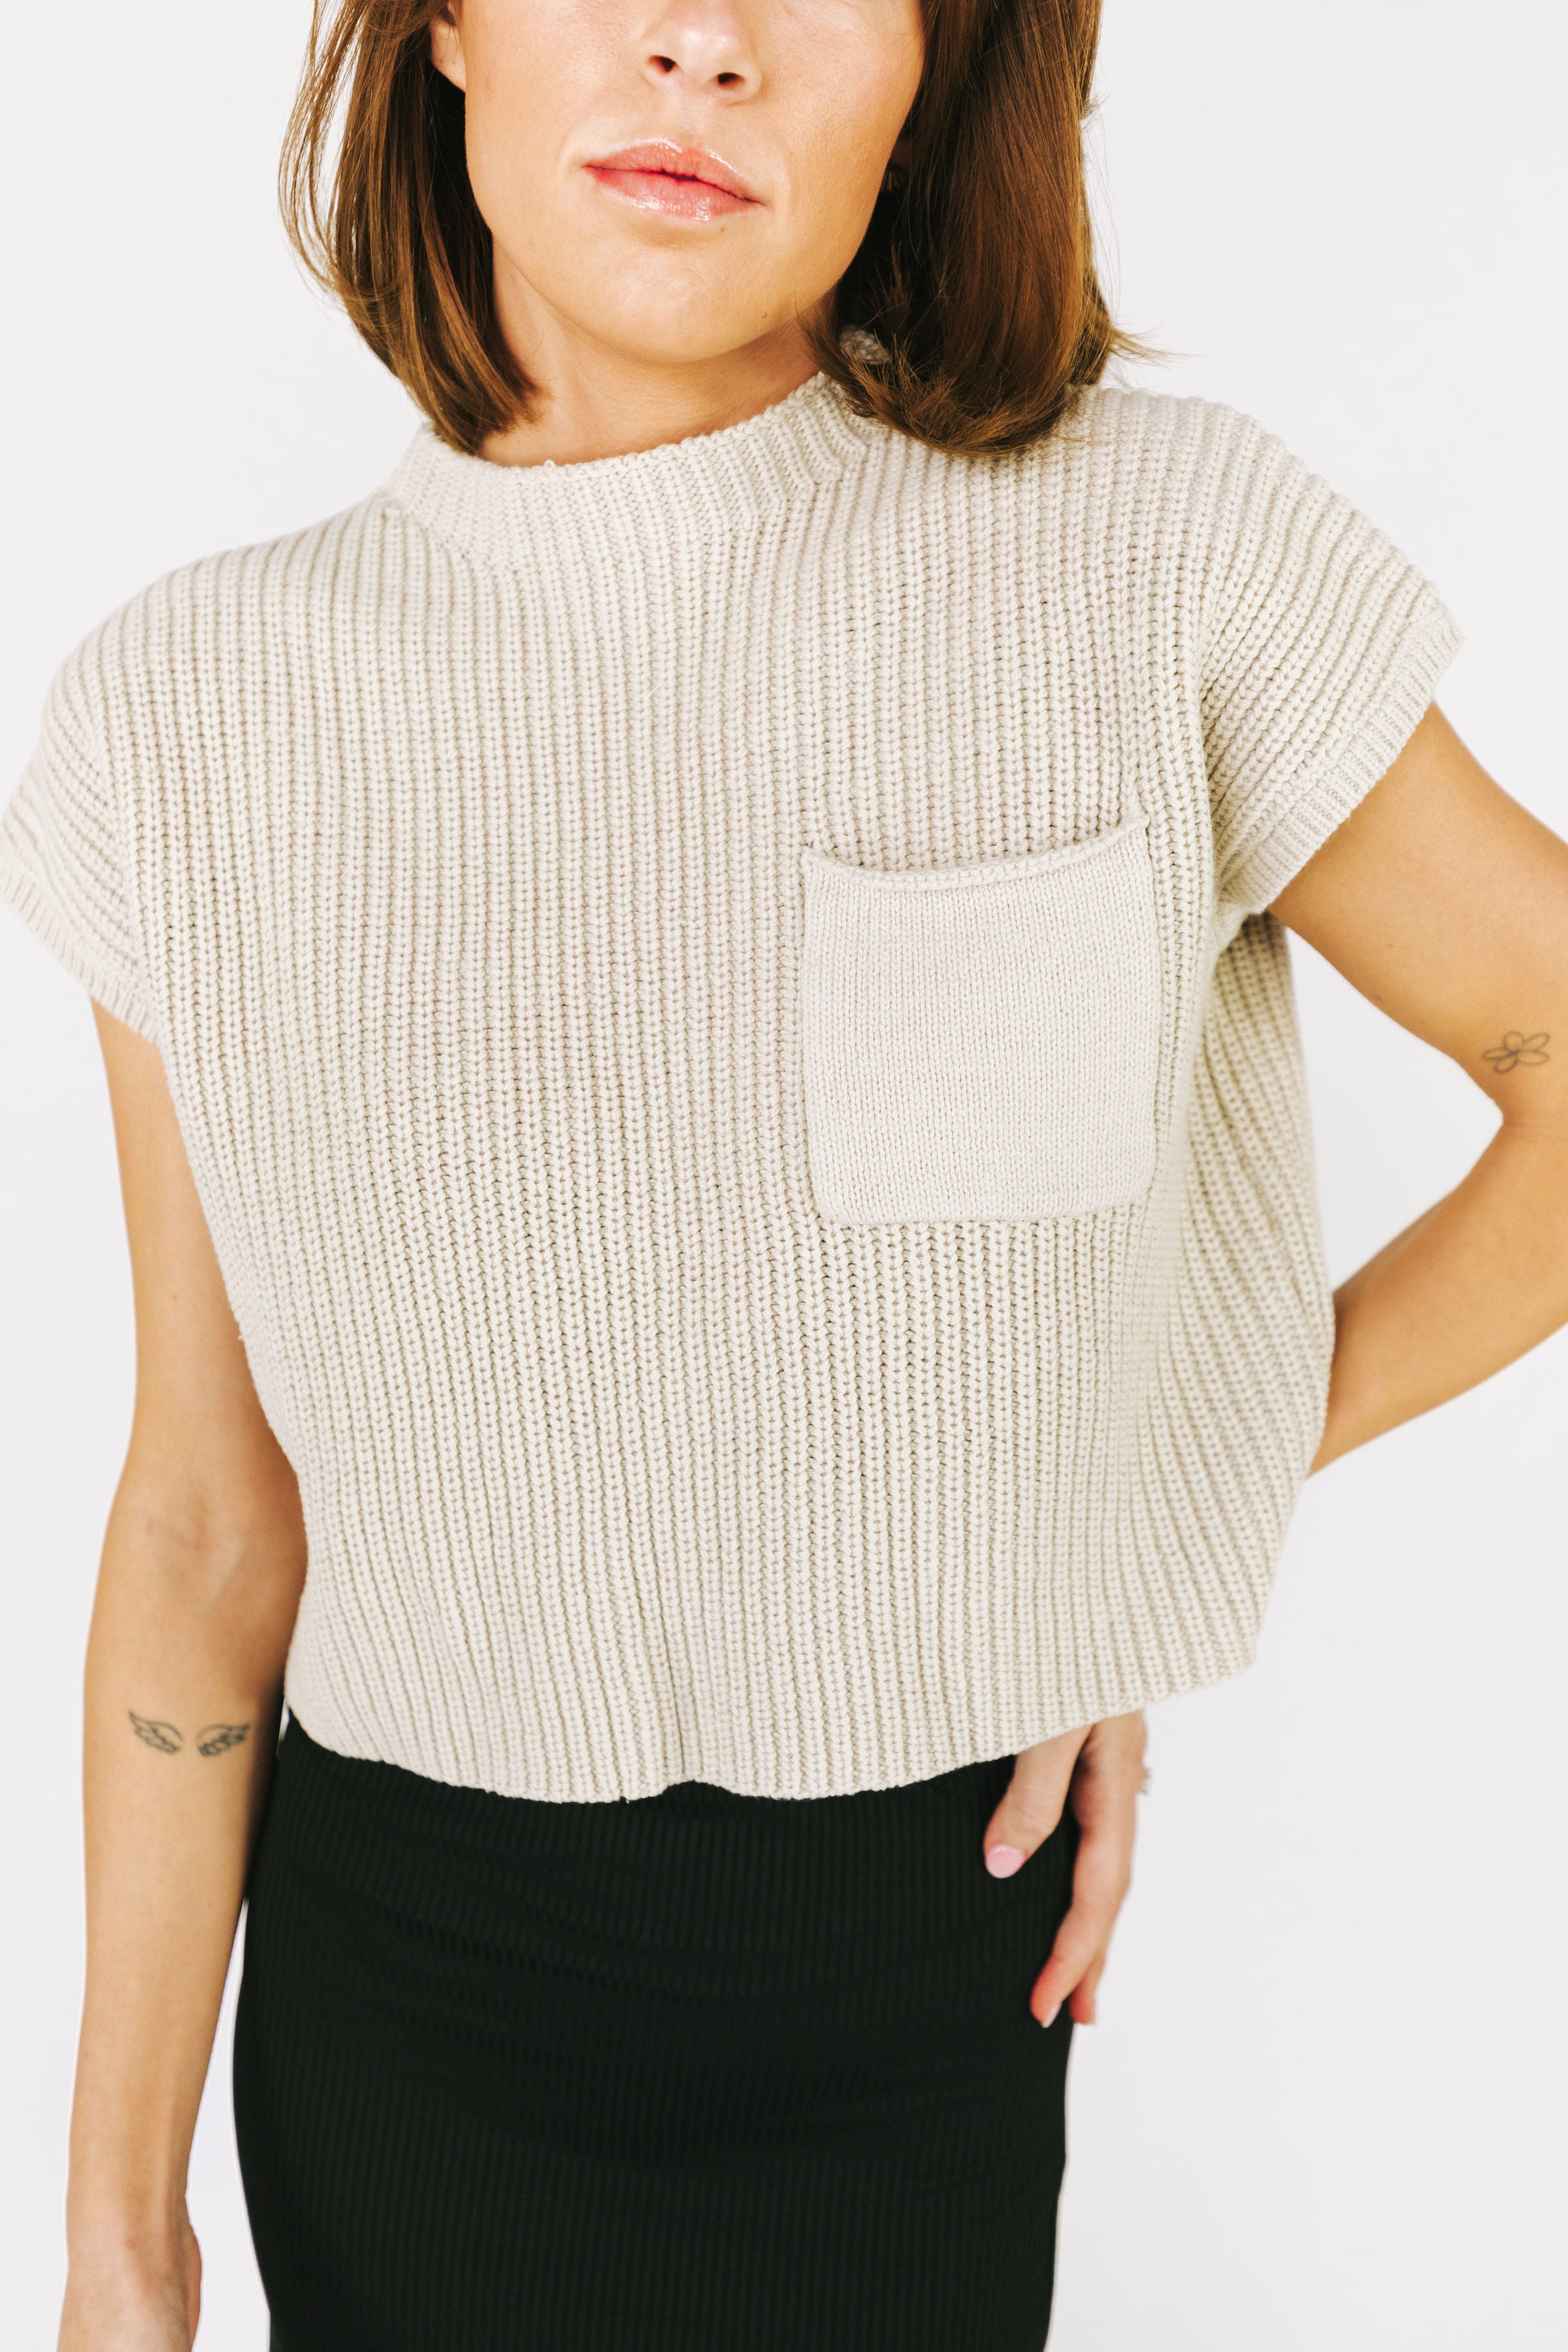 A Notch Higher Sweater - 2 Colors!